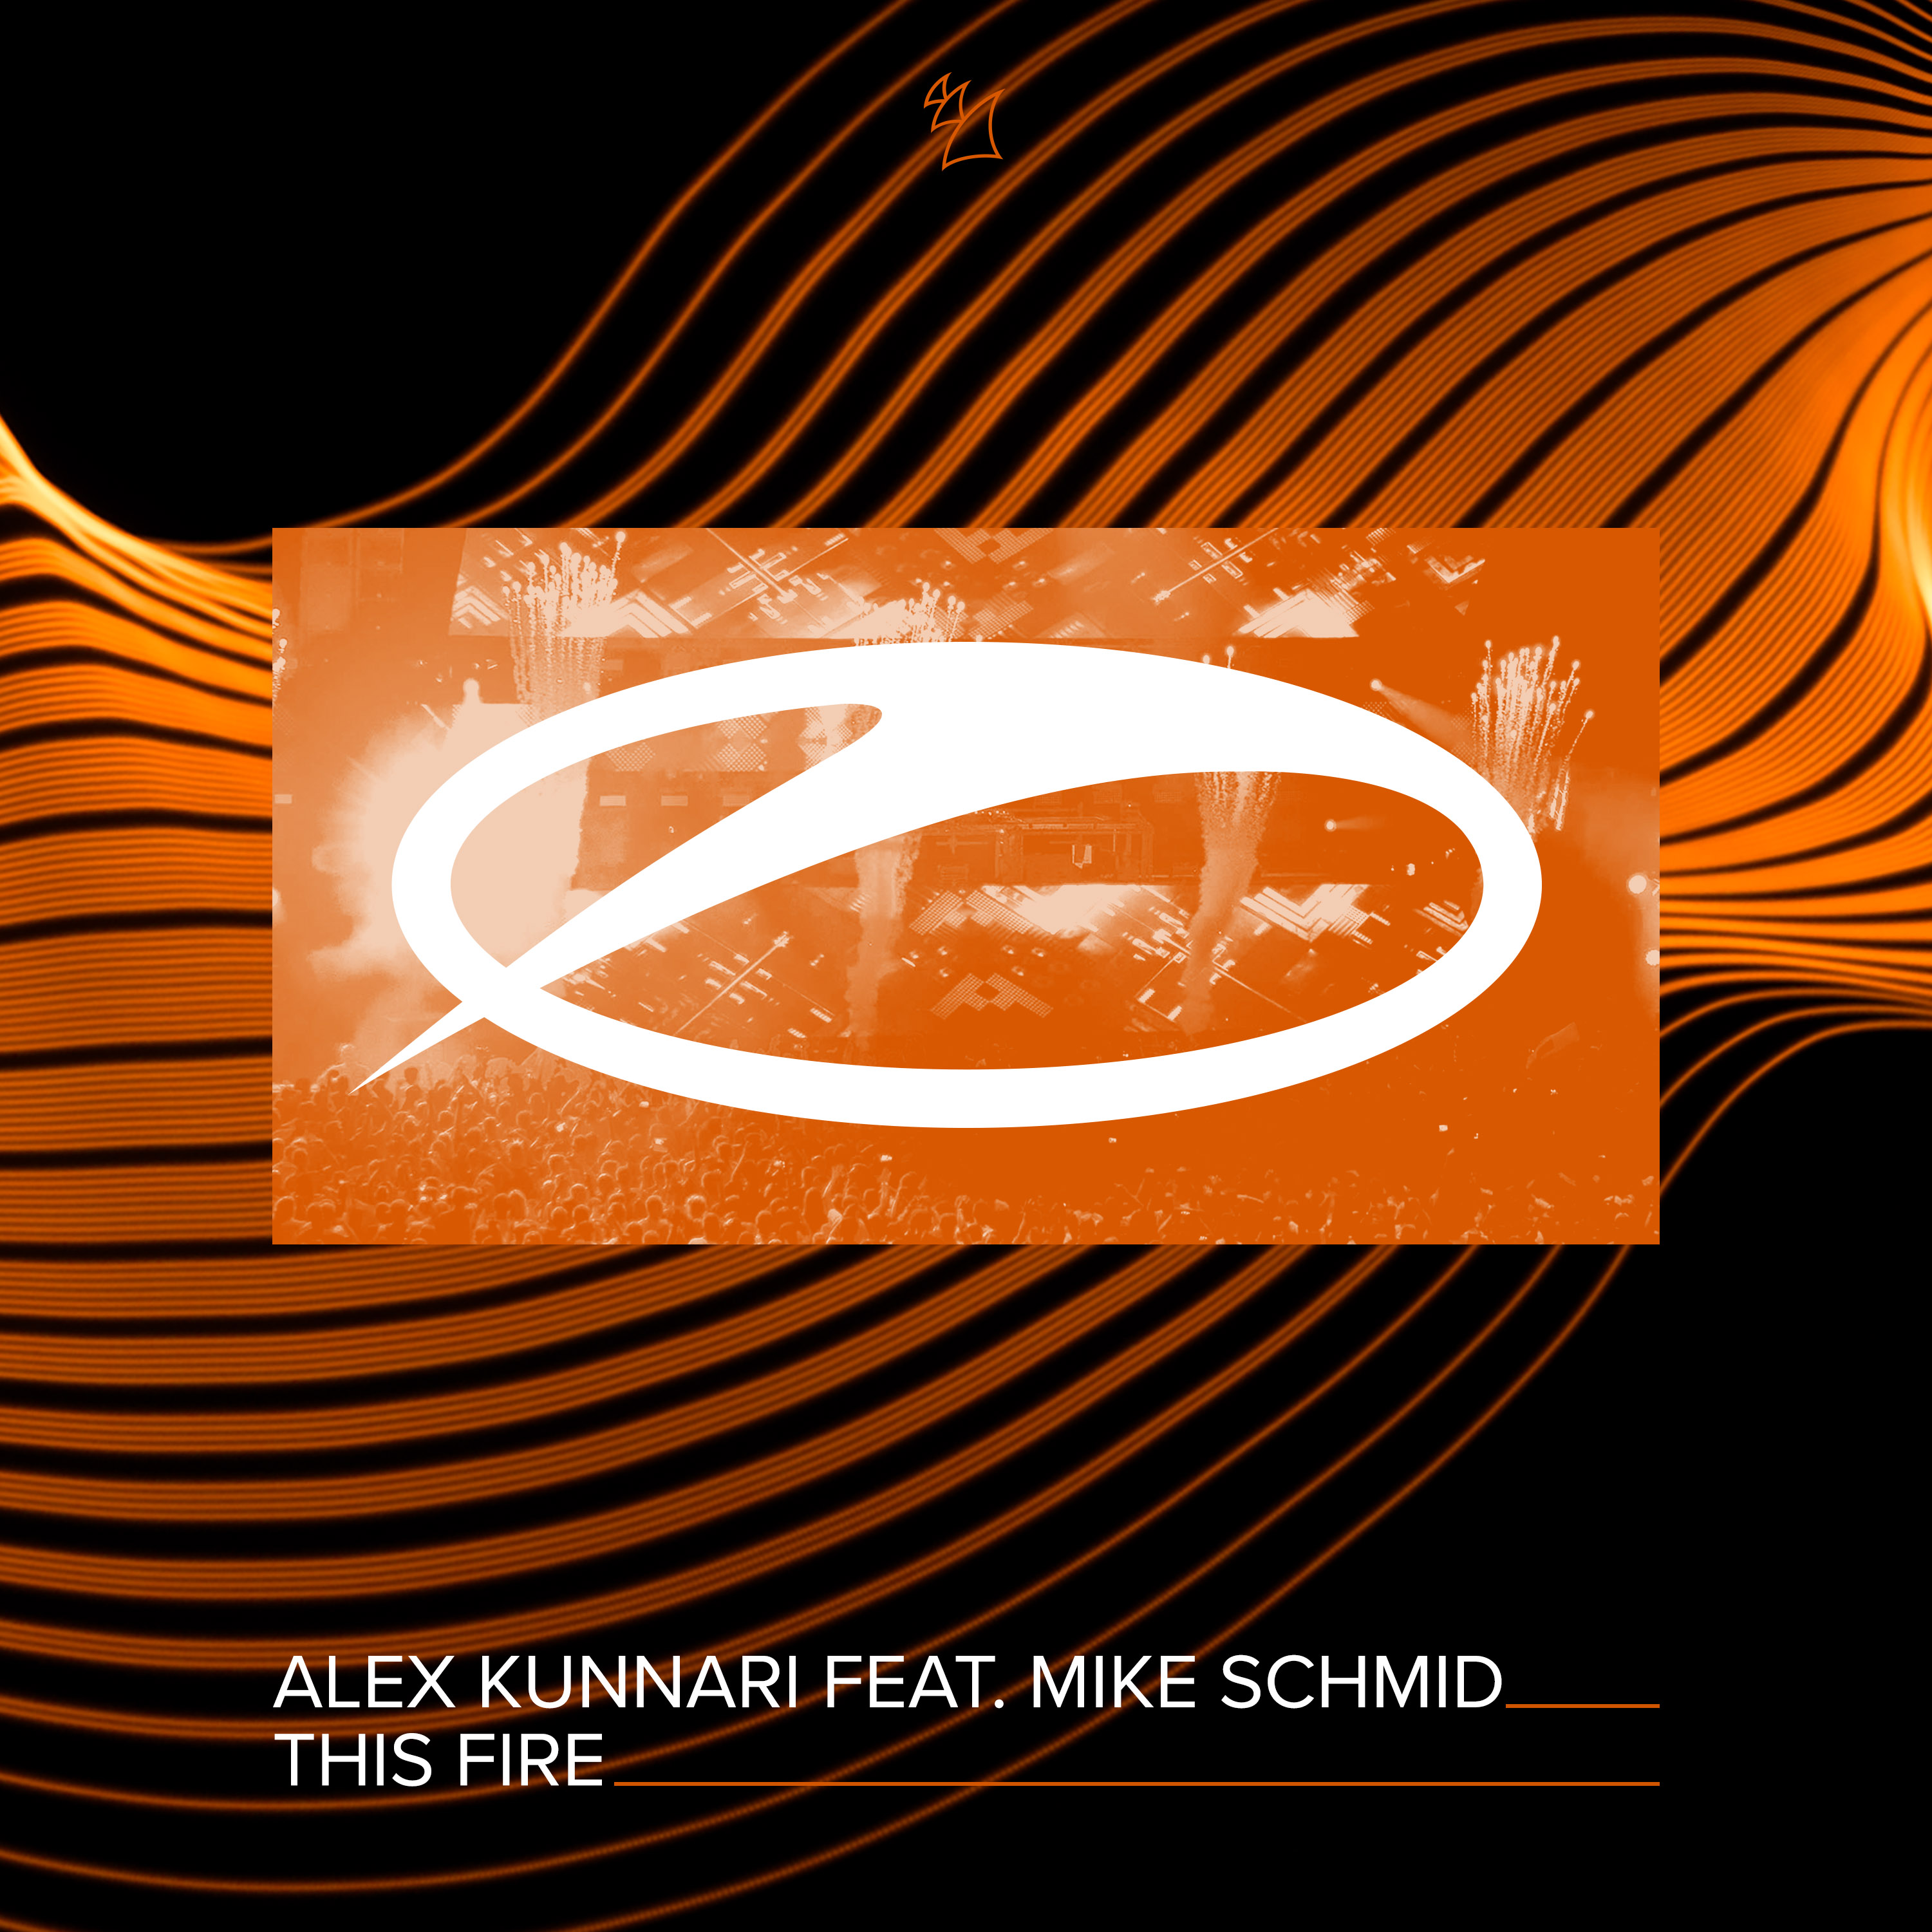 Alex Kunnari feat. Mike Schmid presents This Fire on A State Of Trance